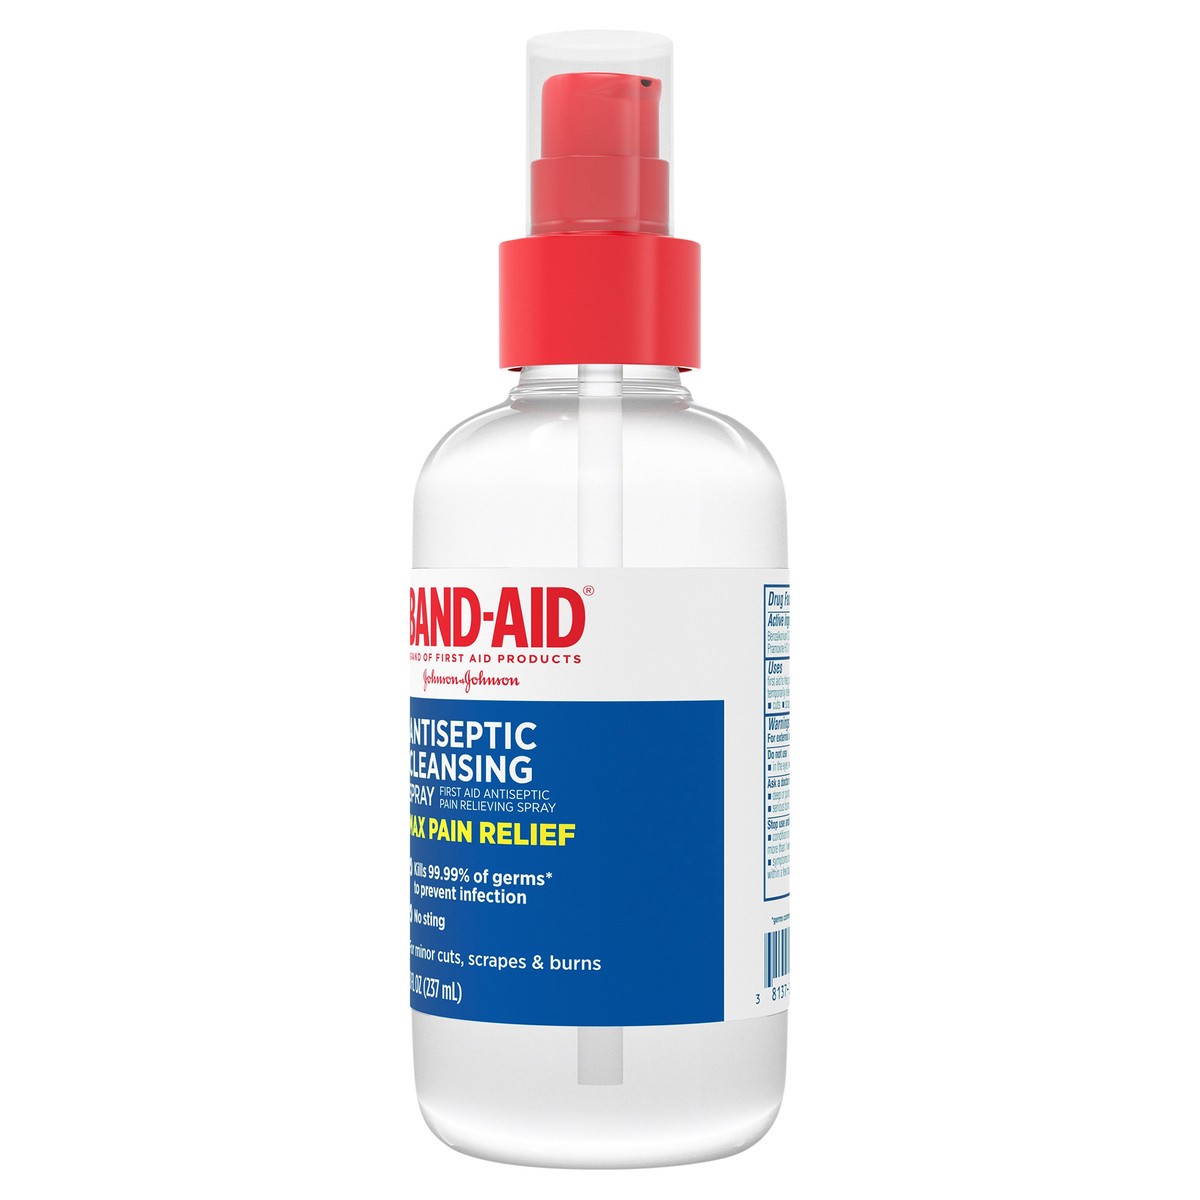 slide 2 of 7, BAND-AID Antiseptic Cleansing Spray, First Aid Antiseptic Spray Relieves Pain & Kill Germs, with Benzalkonium Cl Wound Antiseptic & Pramoxine HCl Topical Analgesic, 8 fl. oz, 8 fl oz